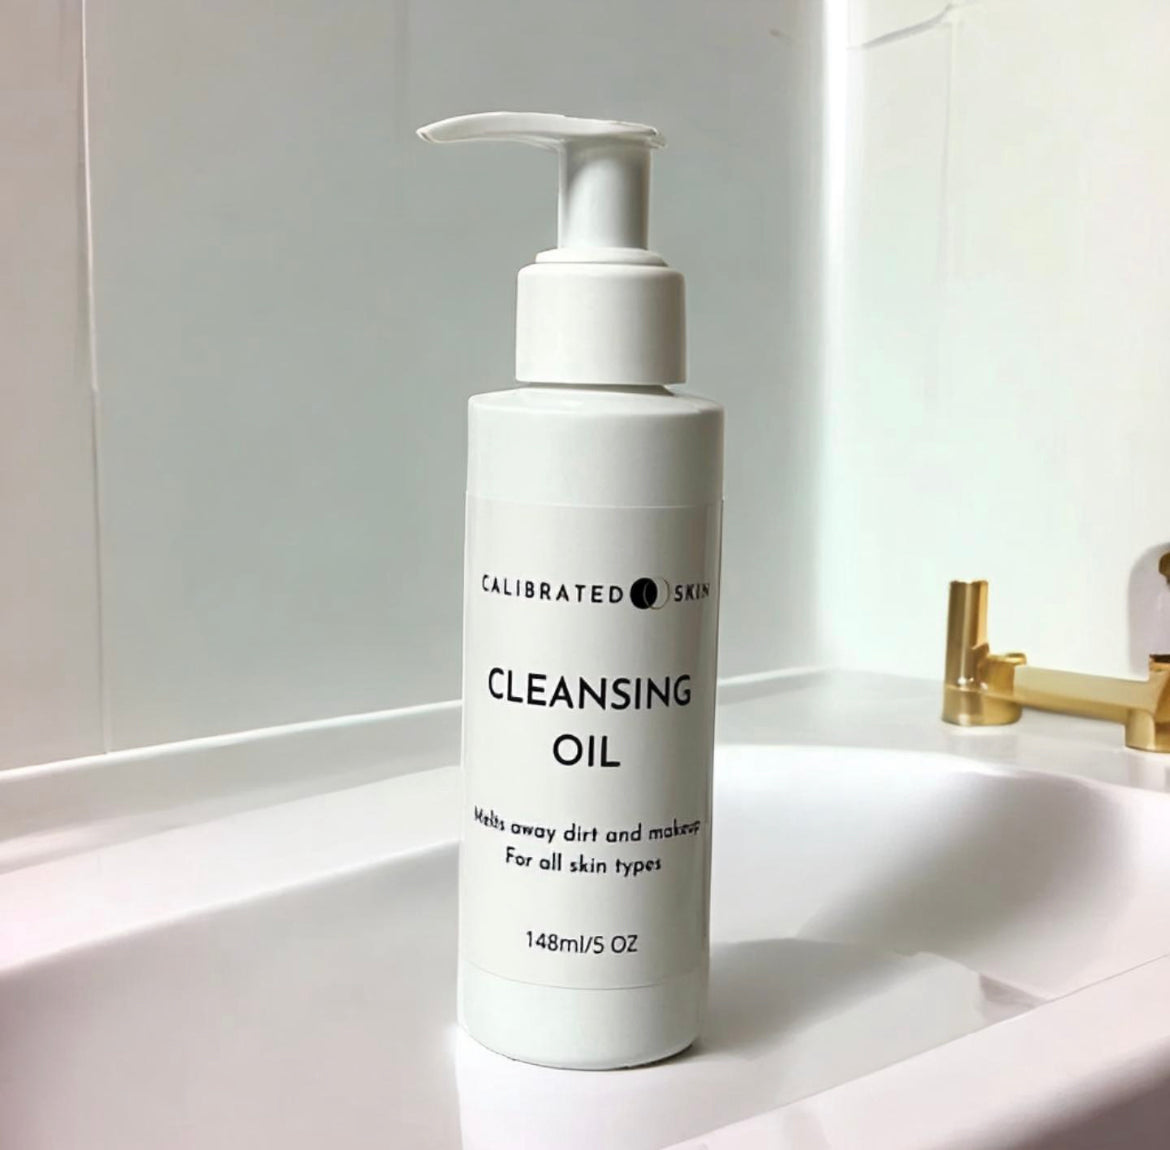 Cleansing Oil - for all skin types (safe for acne prone)